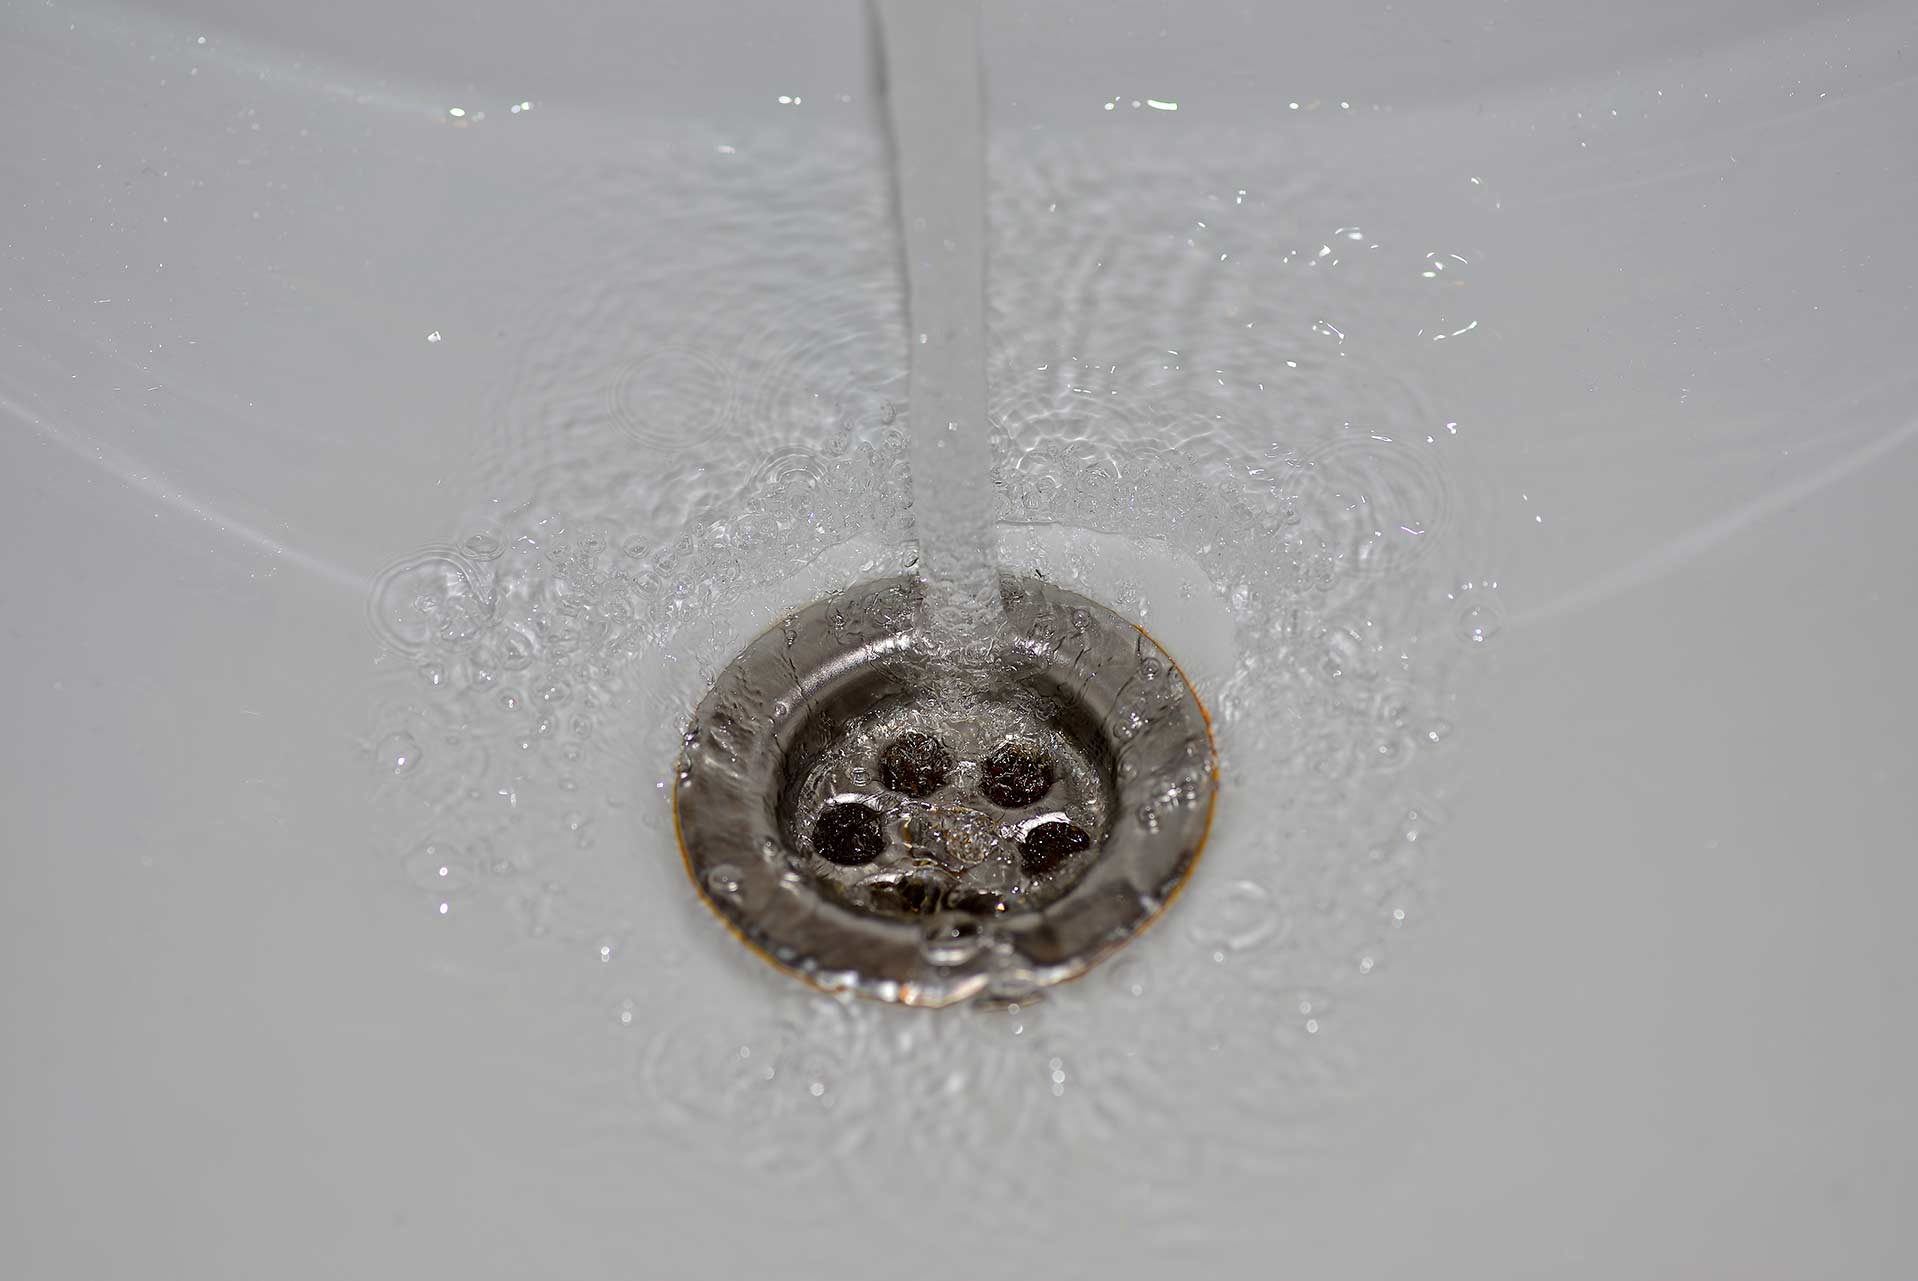 A2B Drains provides services to unblock blocked sinks and drains for properties in Barnet.